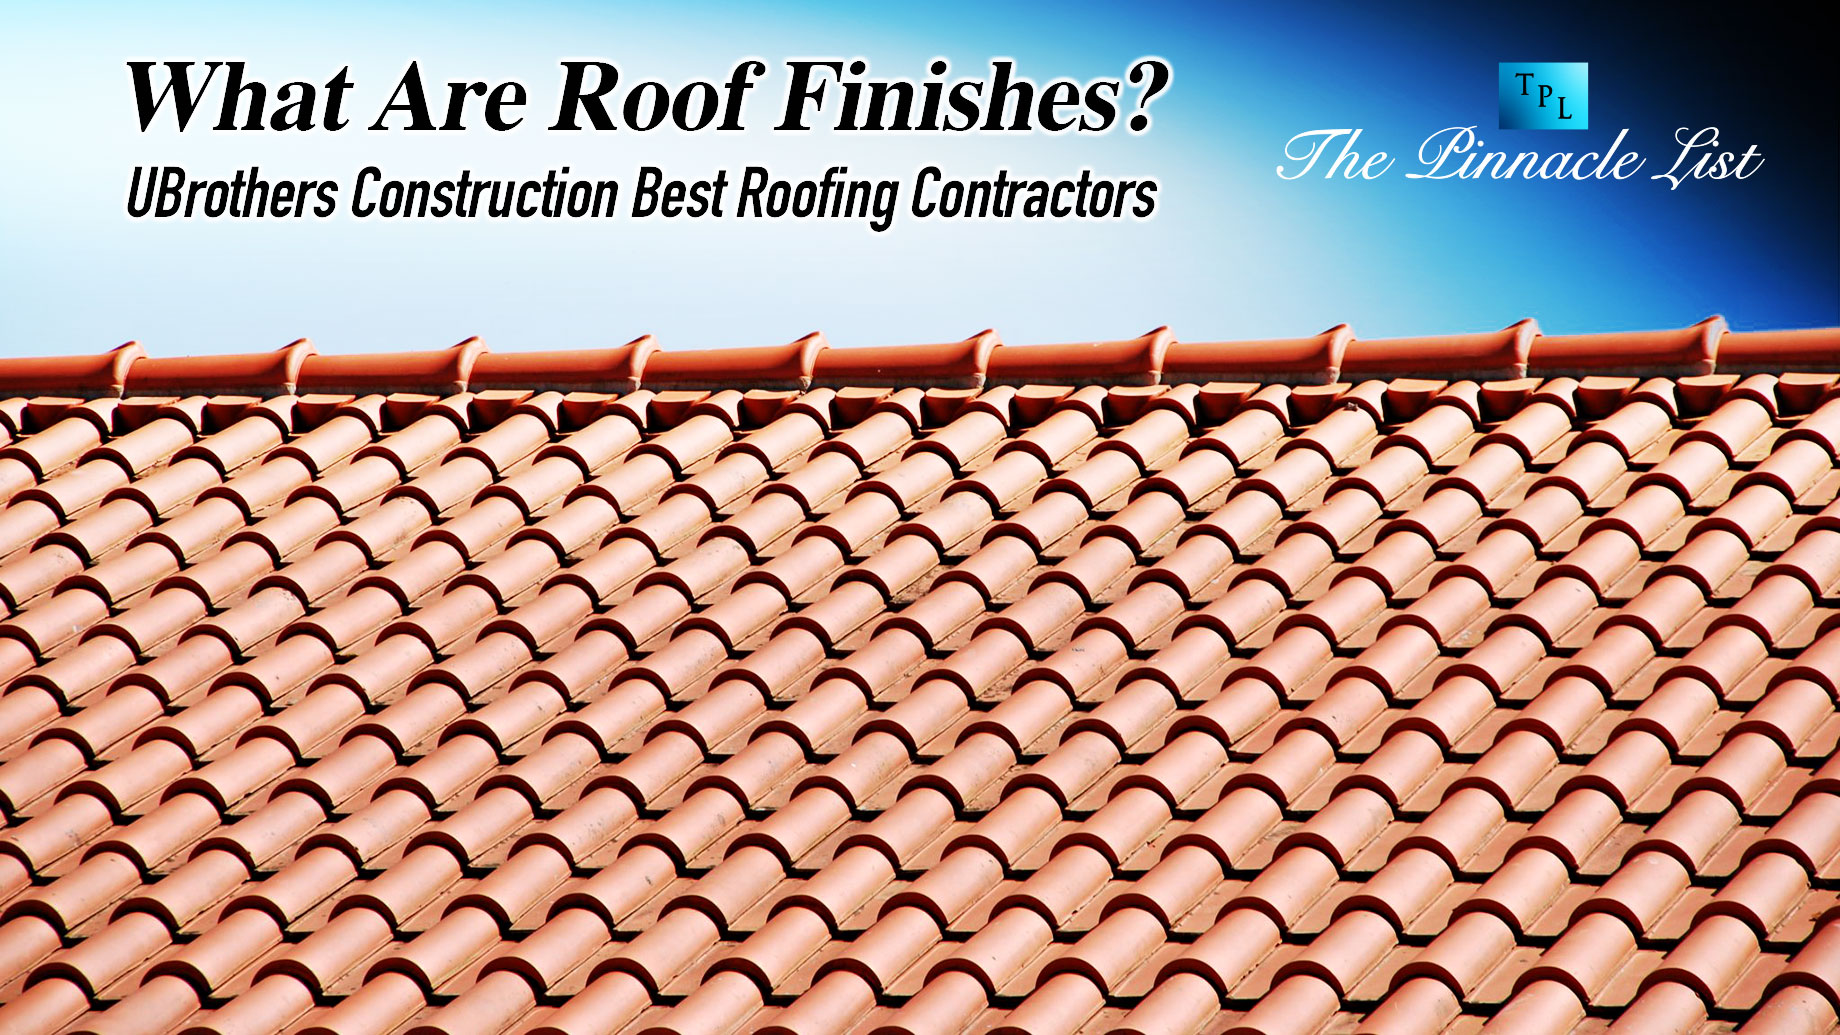 What Are Roof Finishes? UBrothers Construction Best Roofing Contractors